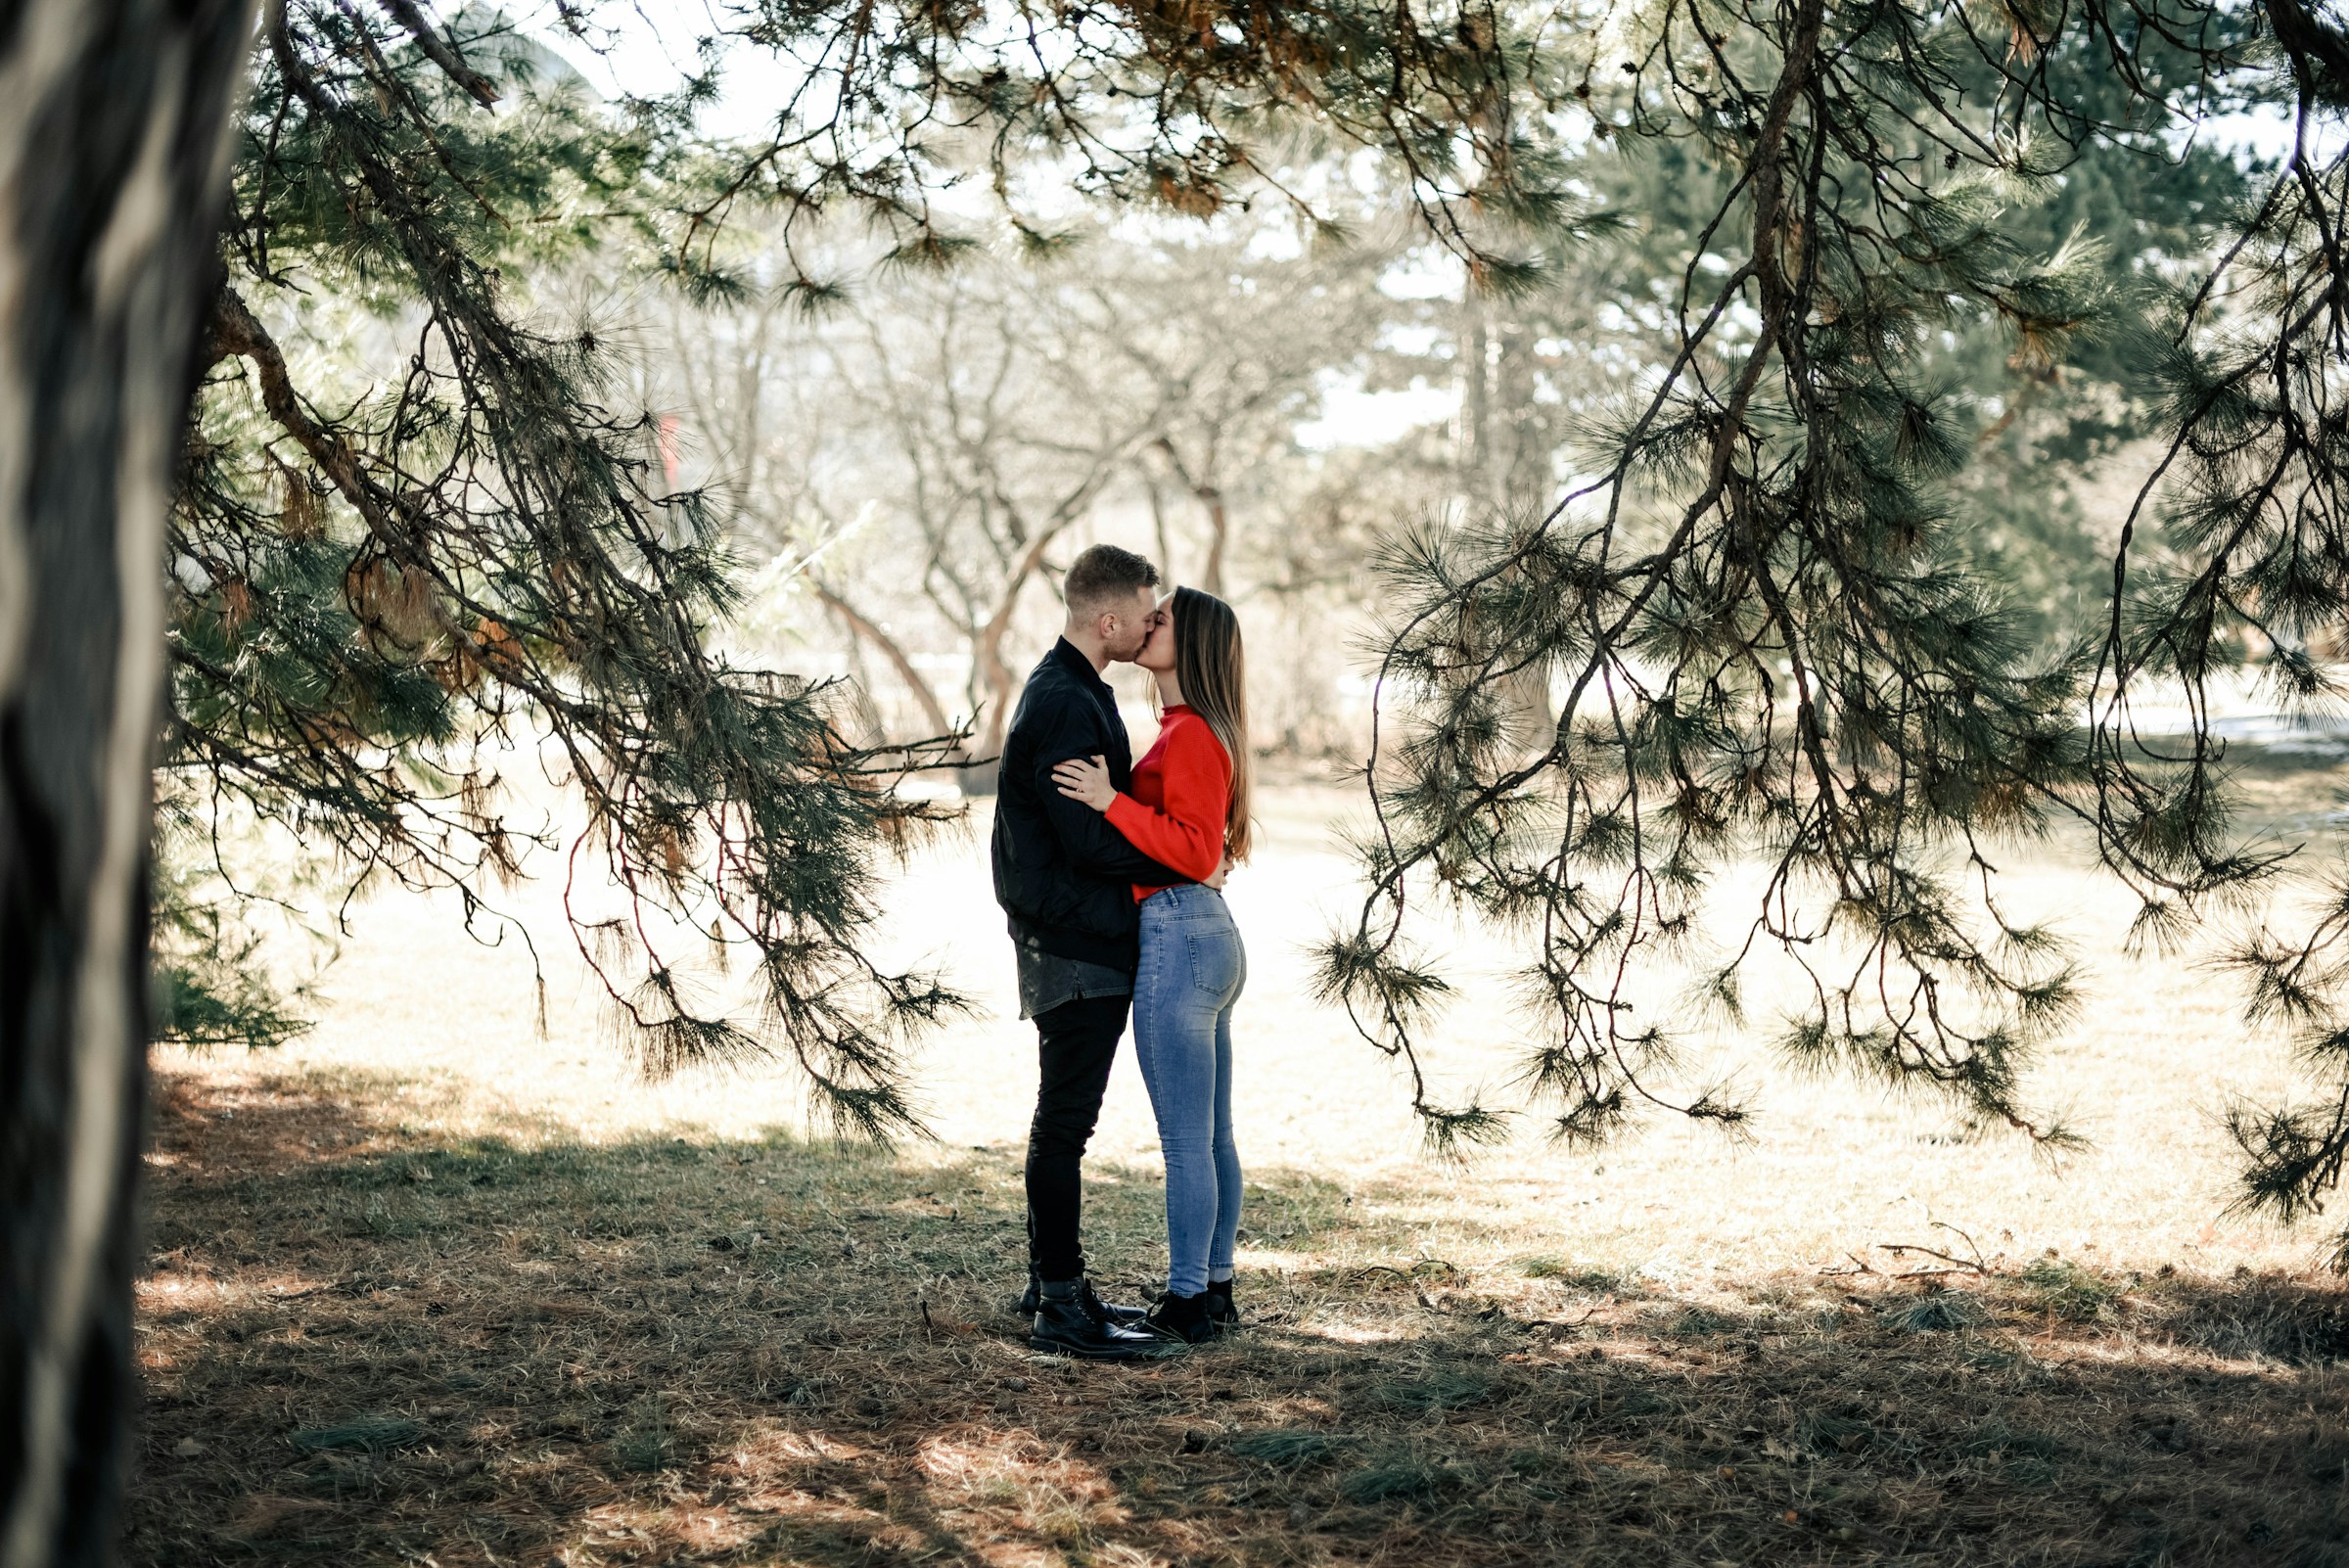 Couple kissing in a forest. | Source: Unsplash